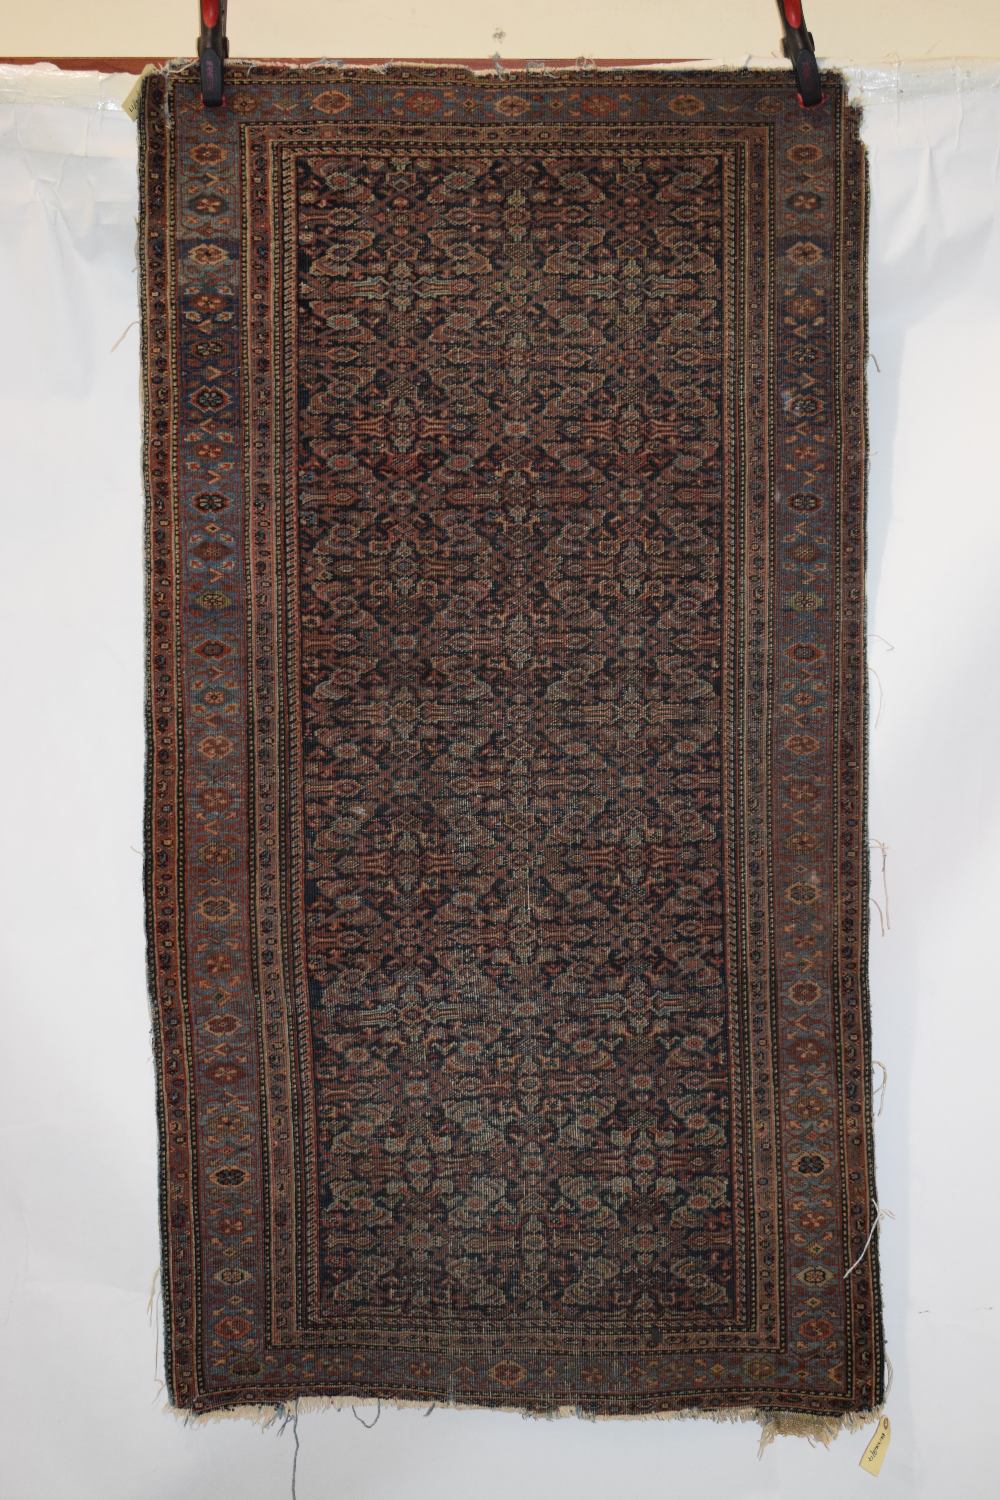 Feraghan rug, north west Persia, early 20th century, 5ft. 6in. X 2ft. 11in. 1.68m. X 0.89m.